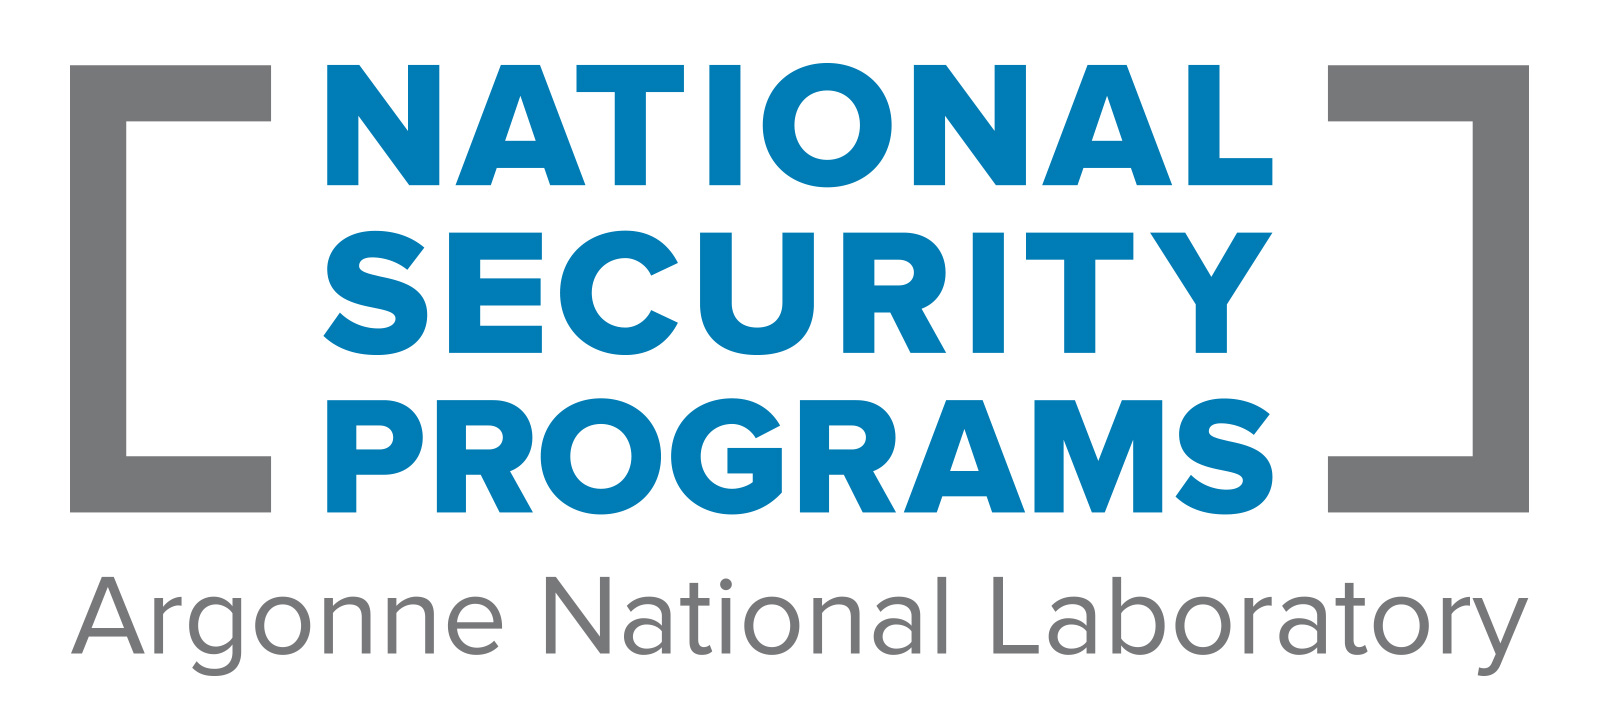 National Security Programs